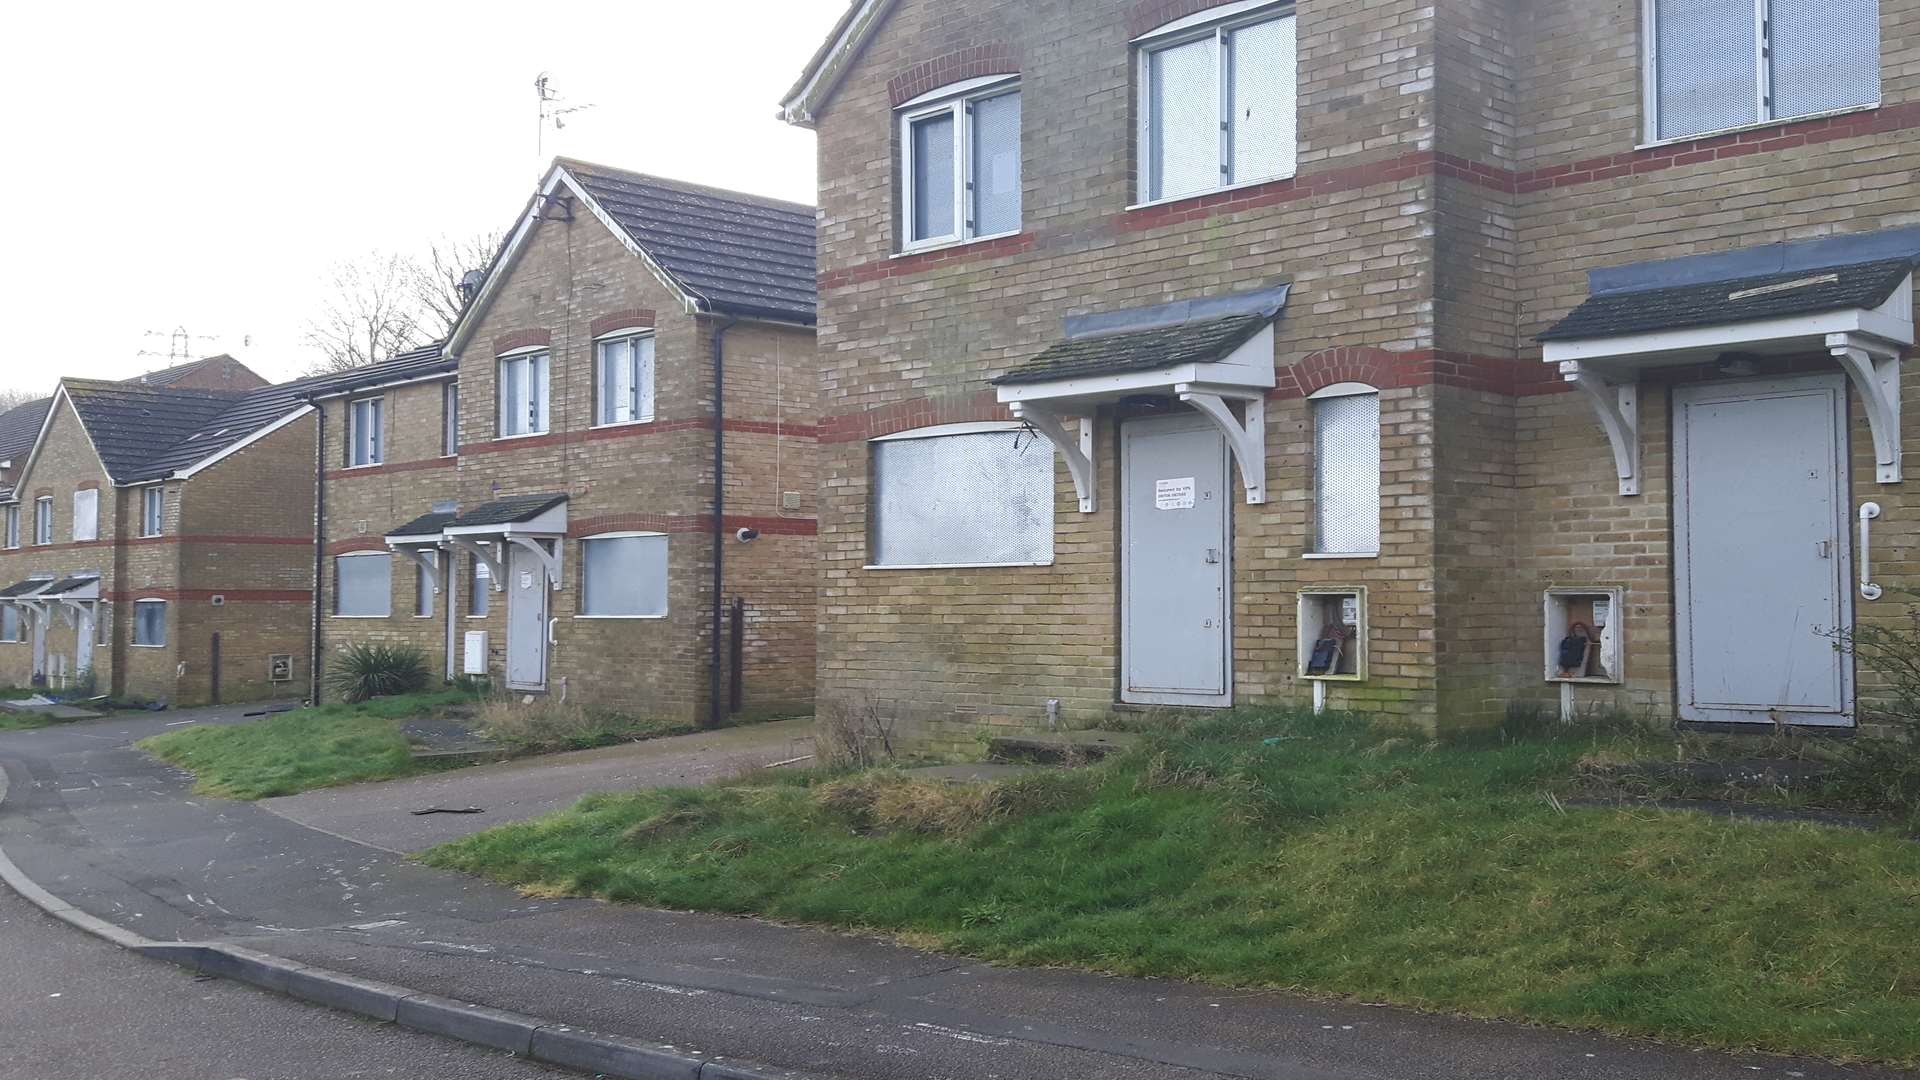 A general scene of the derelict houses at Randolph Road, Dover.